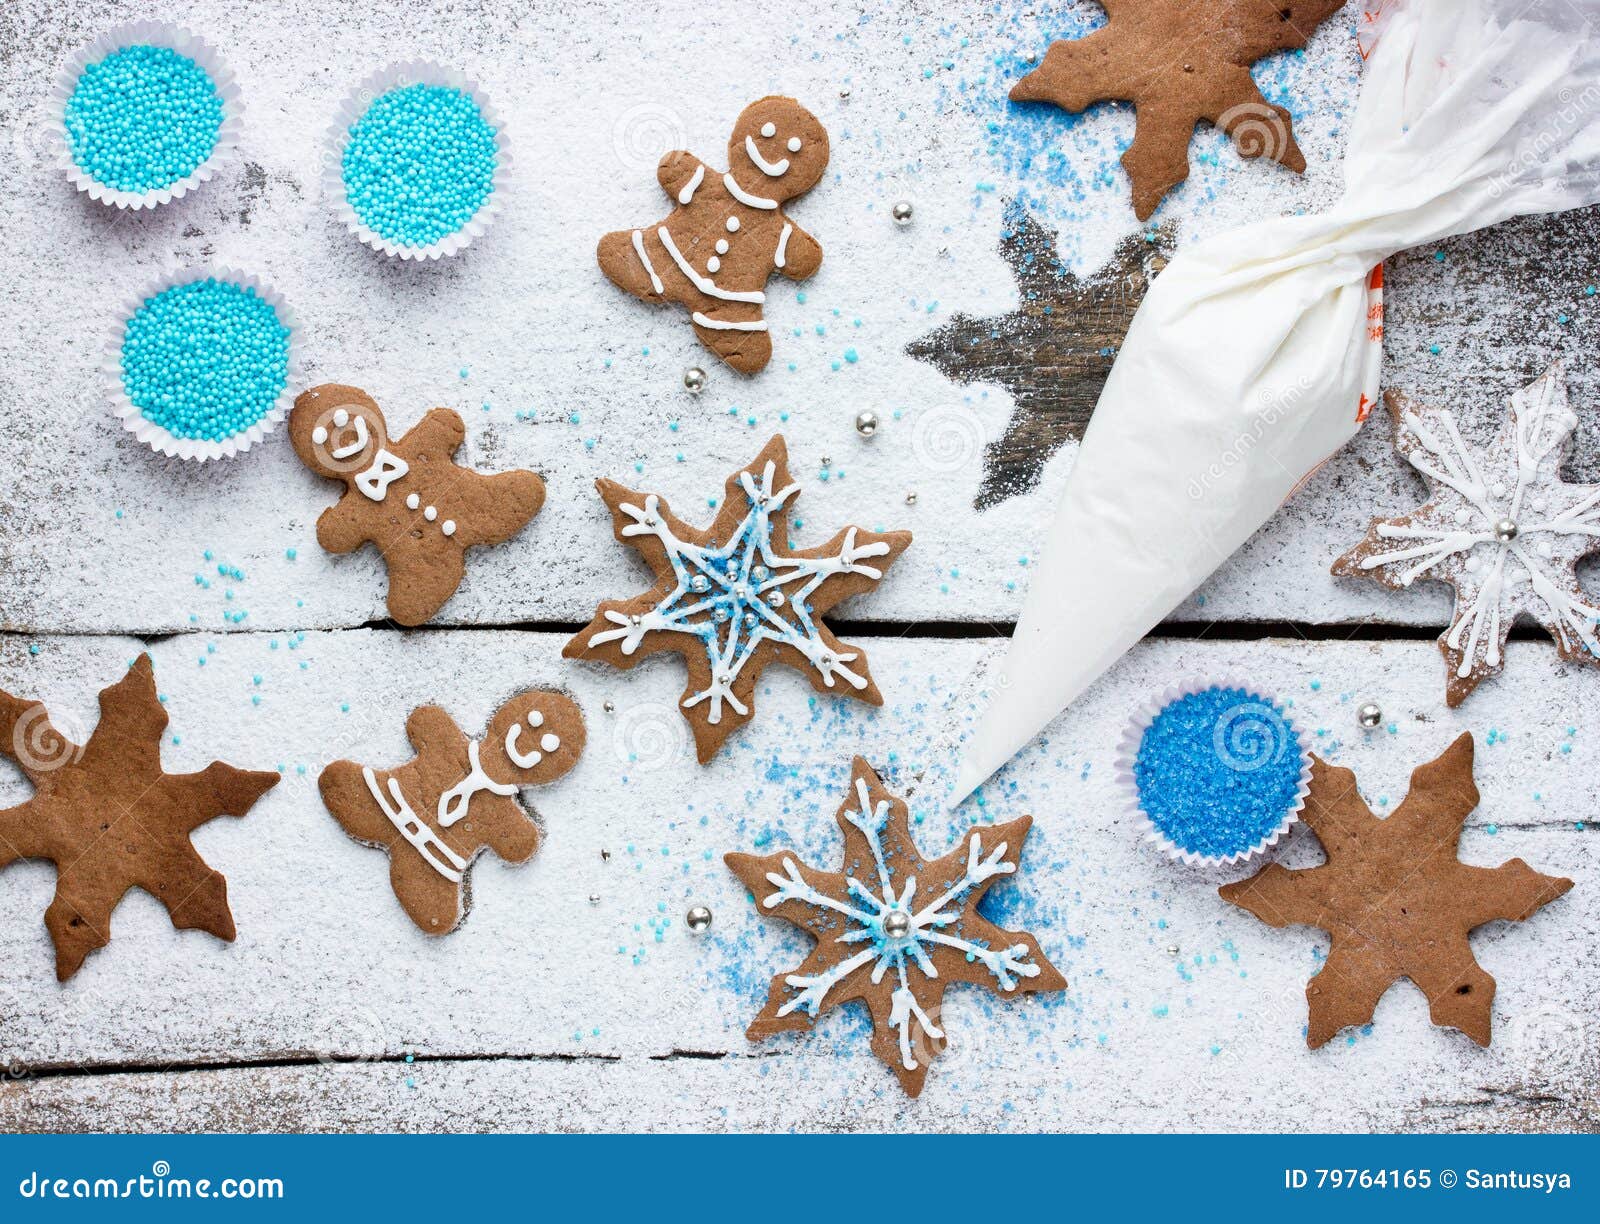 decorating gingerbread man and snowflake christmas cookie background, christmas treats for kids cooking process